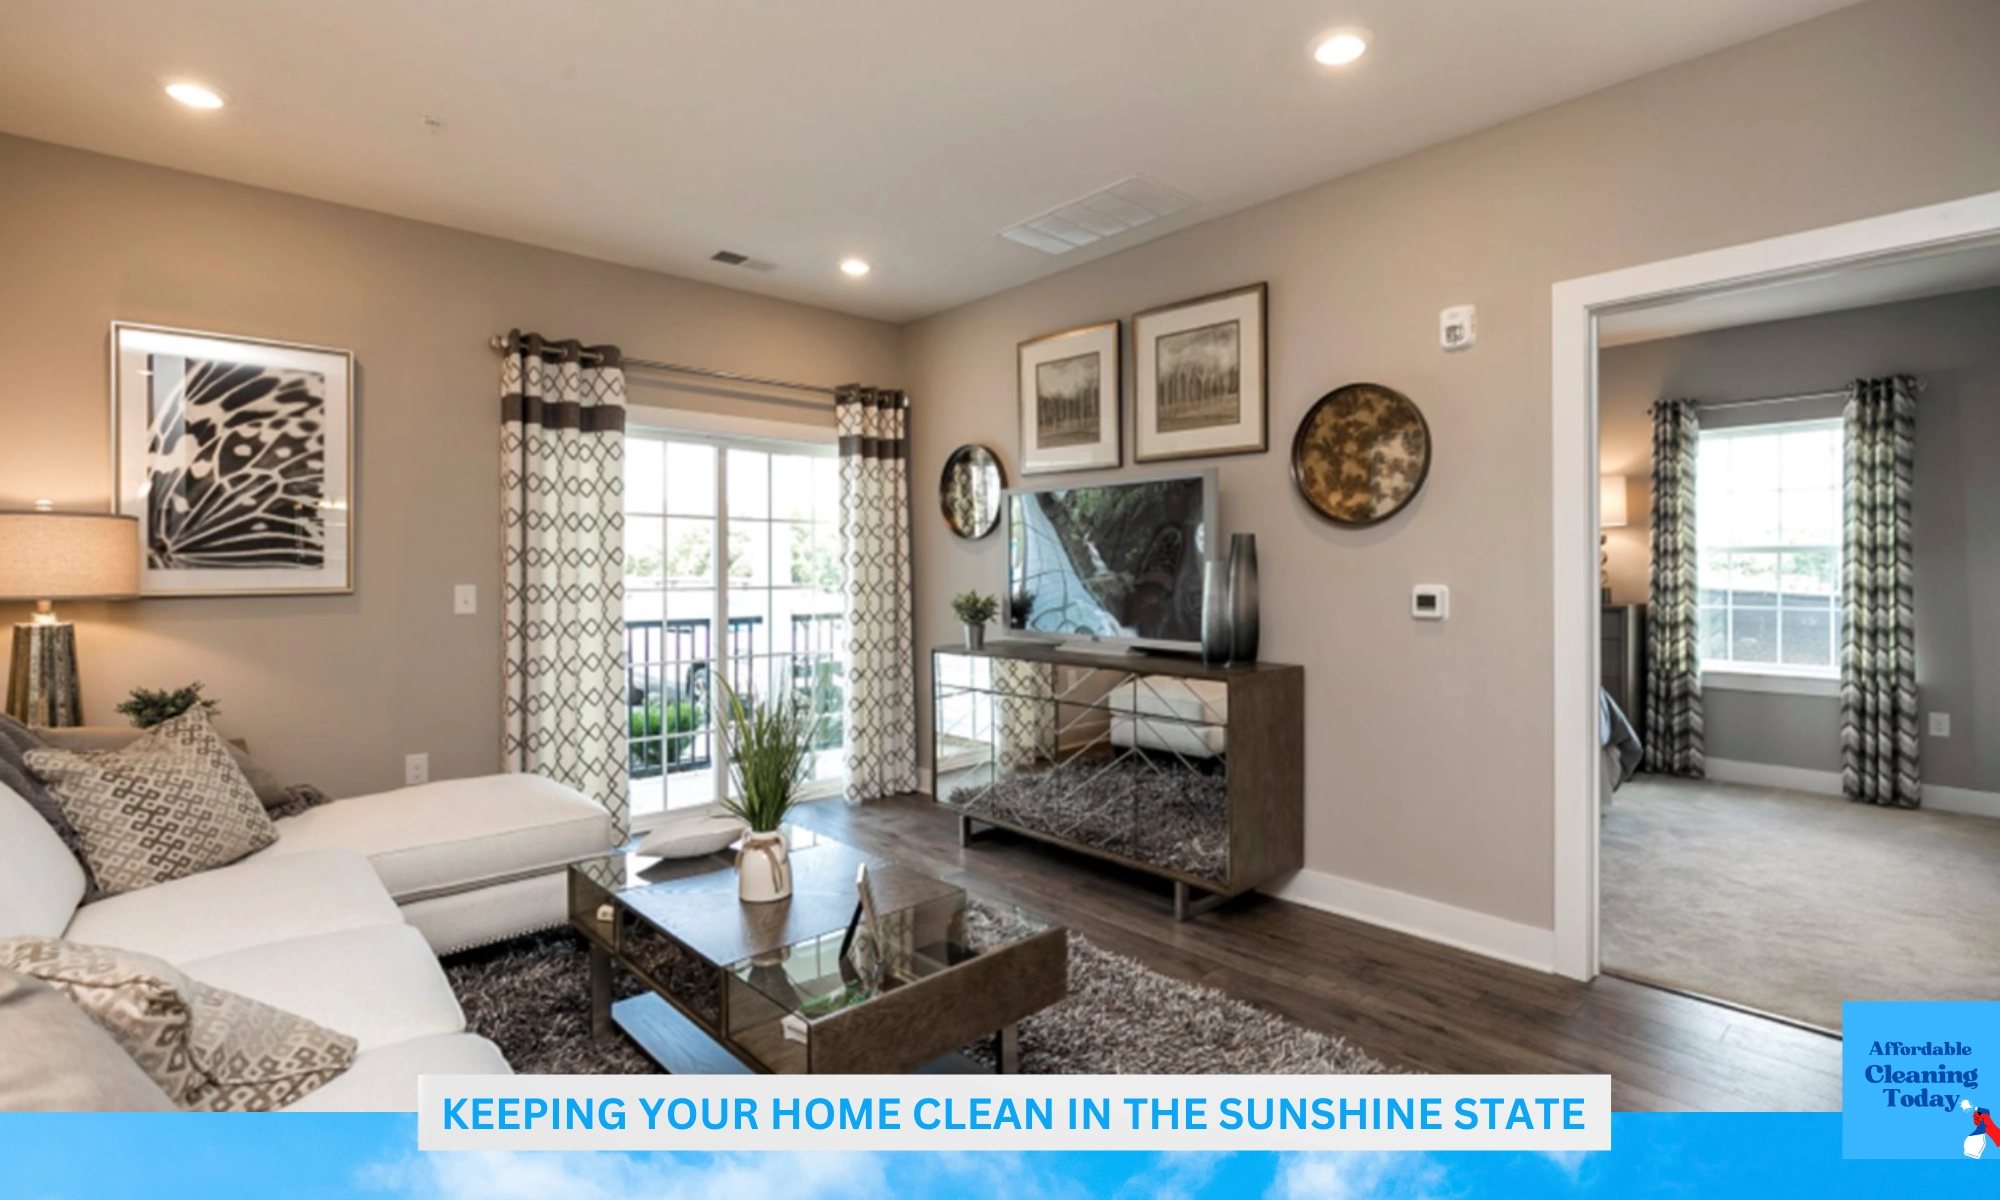 Keeping Your Home Clean in the Sunshine State